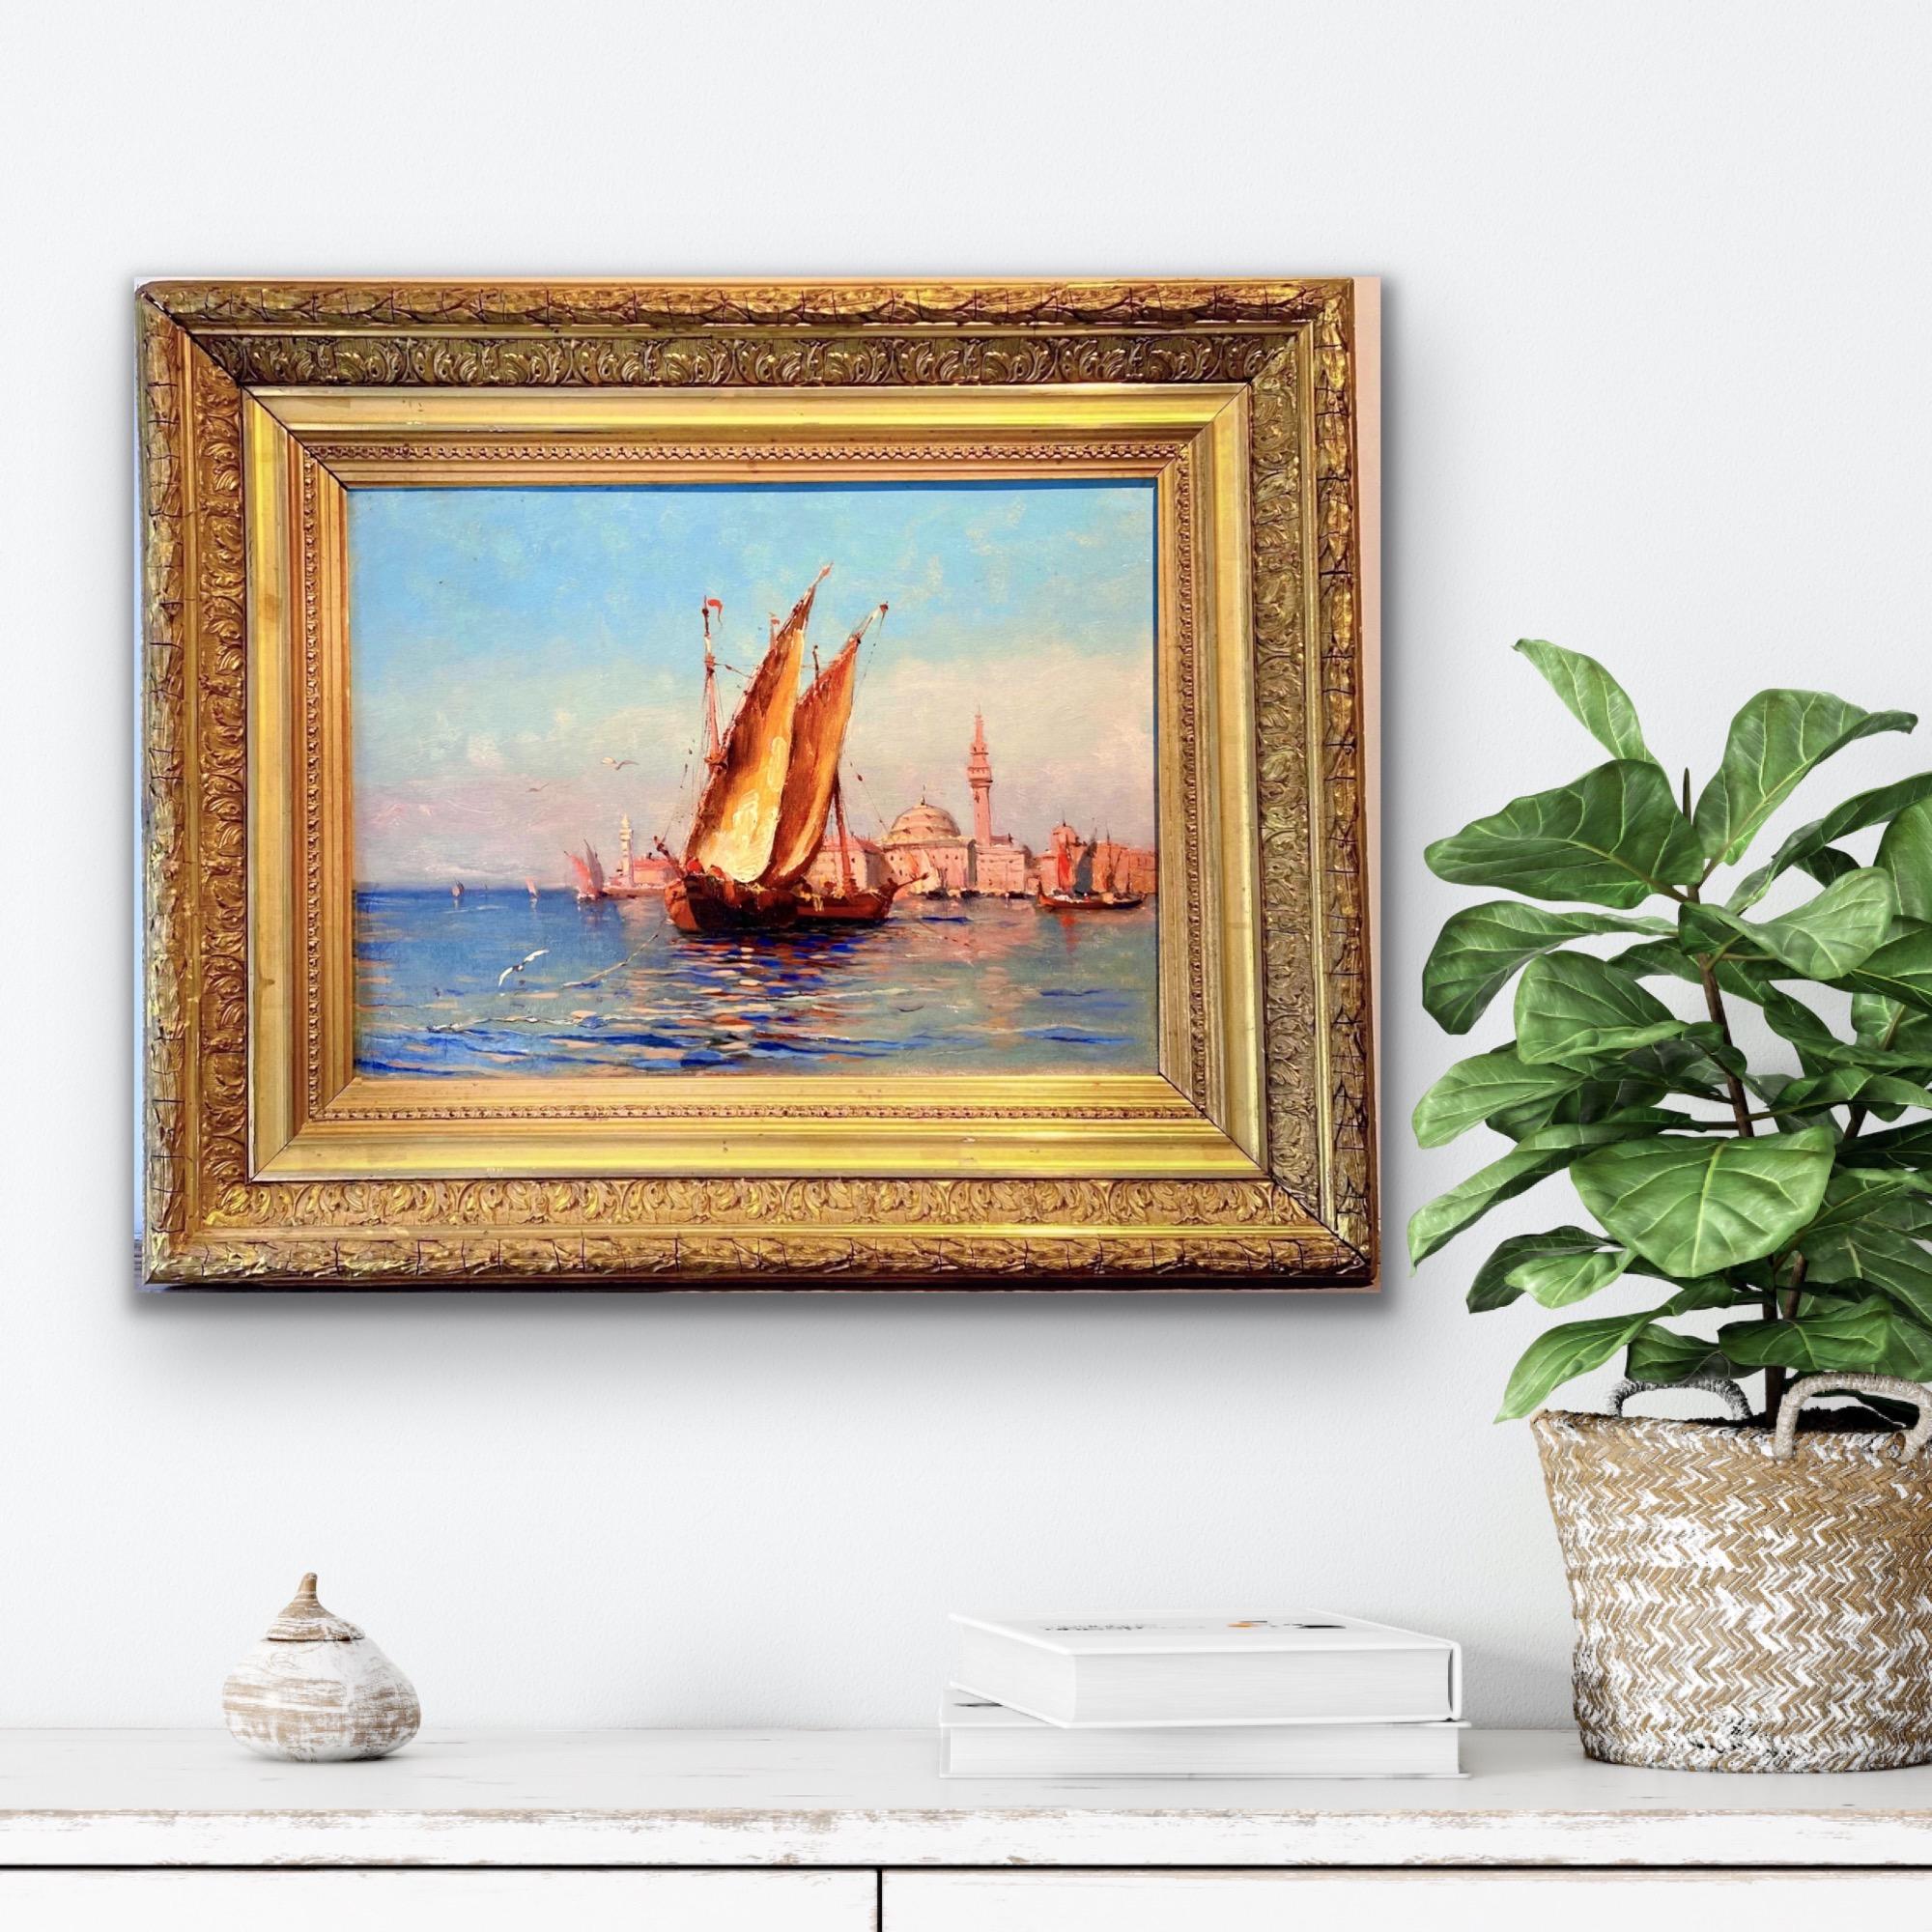 19th century French impressionist painting - View of Venice - Cityscape Boat 9